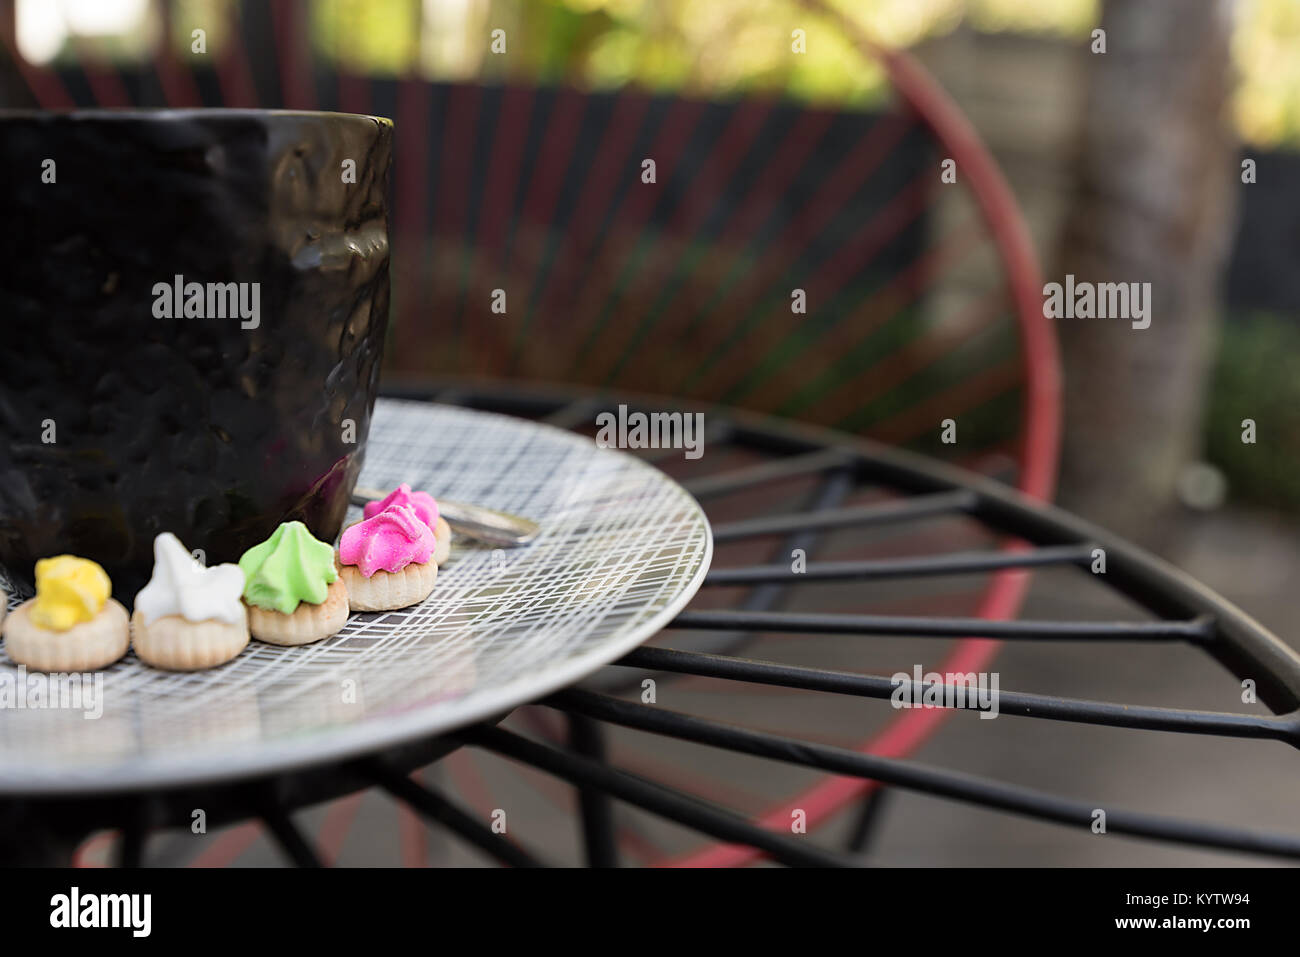 Hot Americano coffee with crema top in a classy black glass surrounded buy colourful classic Ice Gem sweets biscuits on a patterned plate. Stock Photo